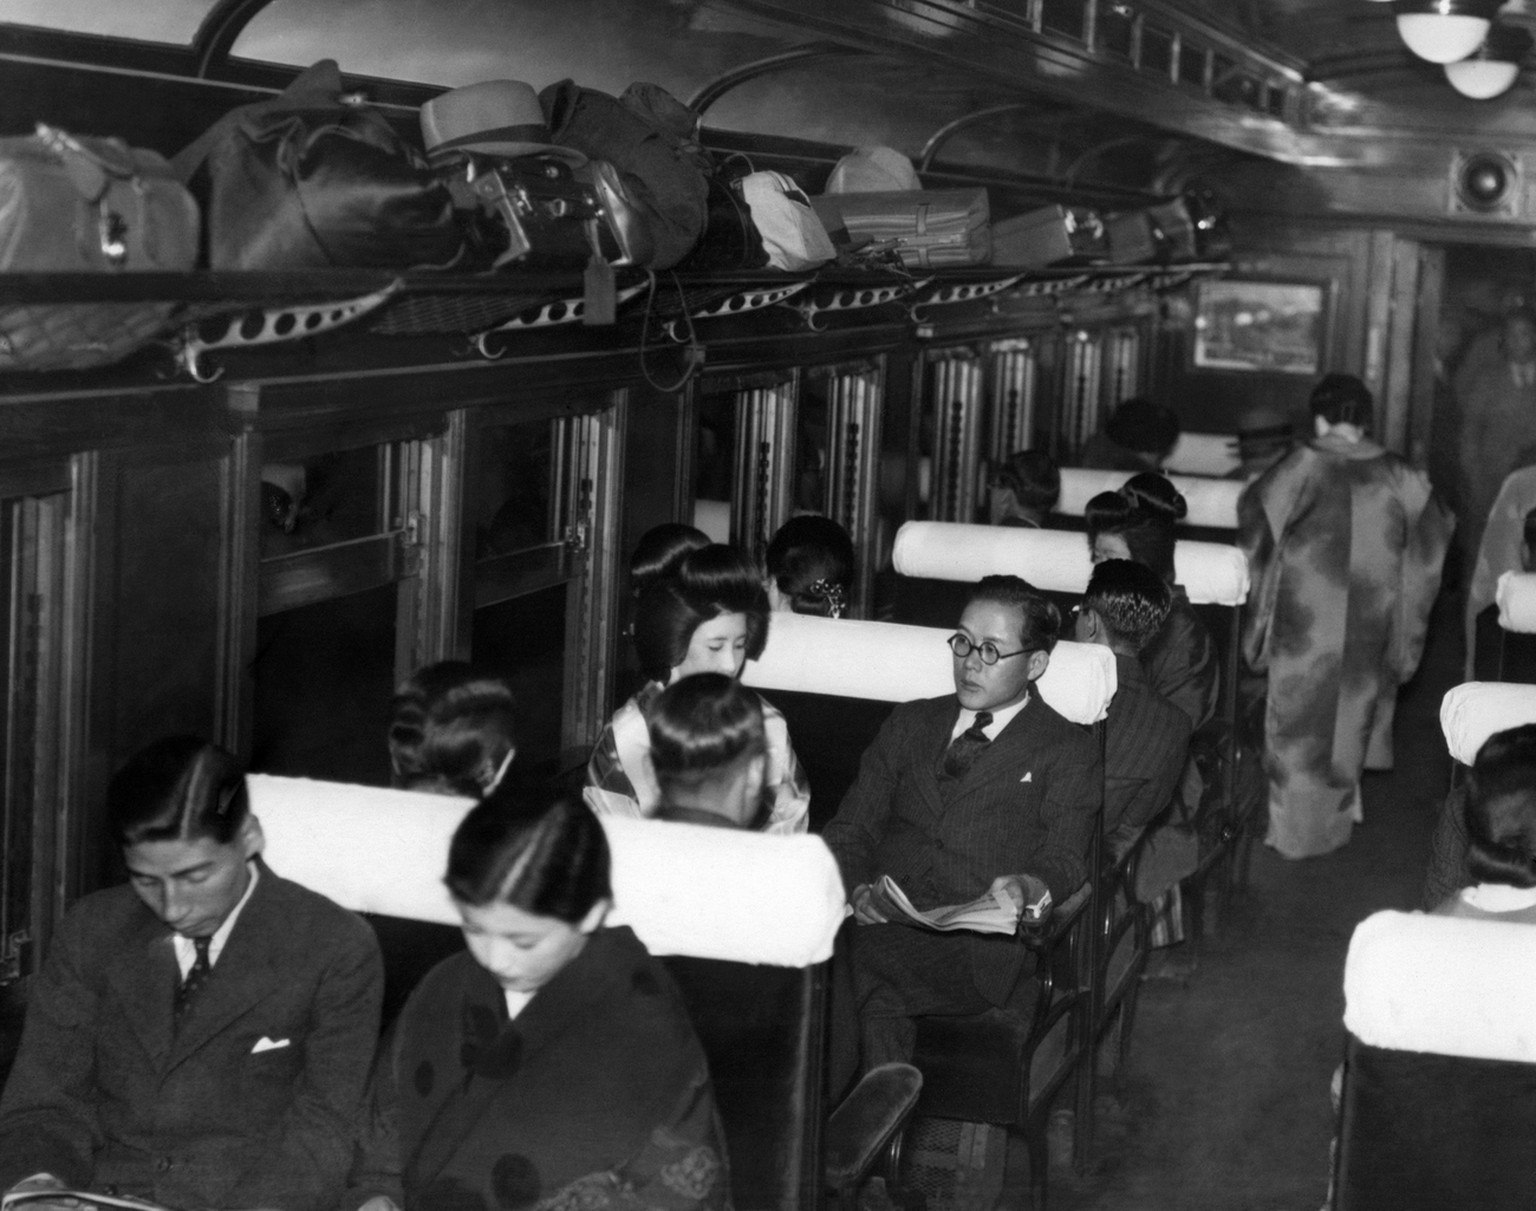 The Honeymoon Train leaves Tokyo Station at 9:15 p.m., Dec. 15, 1936, after there has been ample time for the elaborate wedding banquets and receptions. Most of the train&#039;s passengers are young c ...